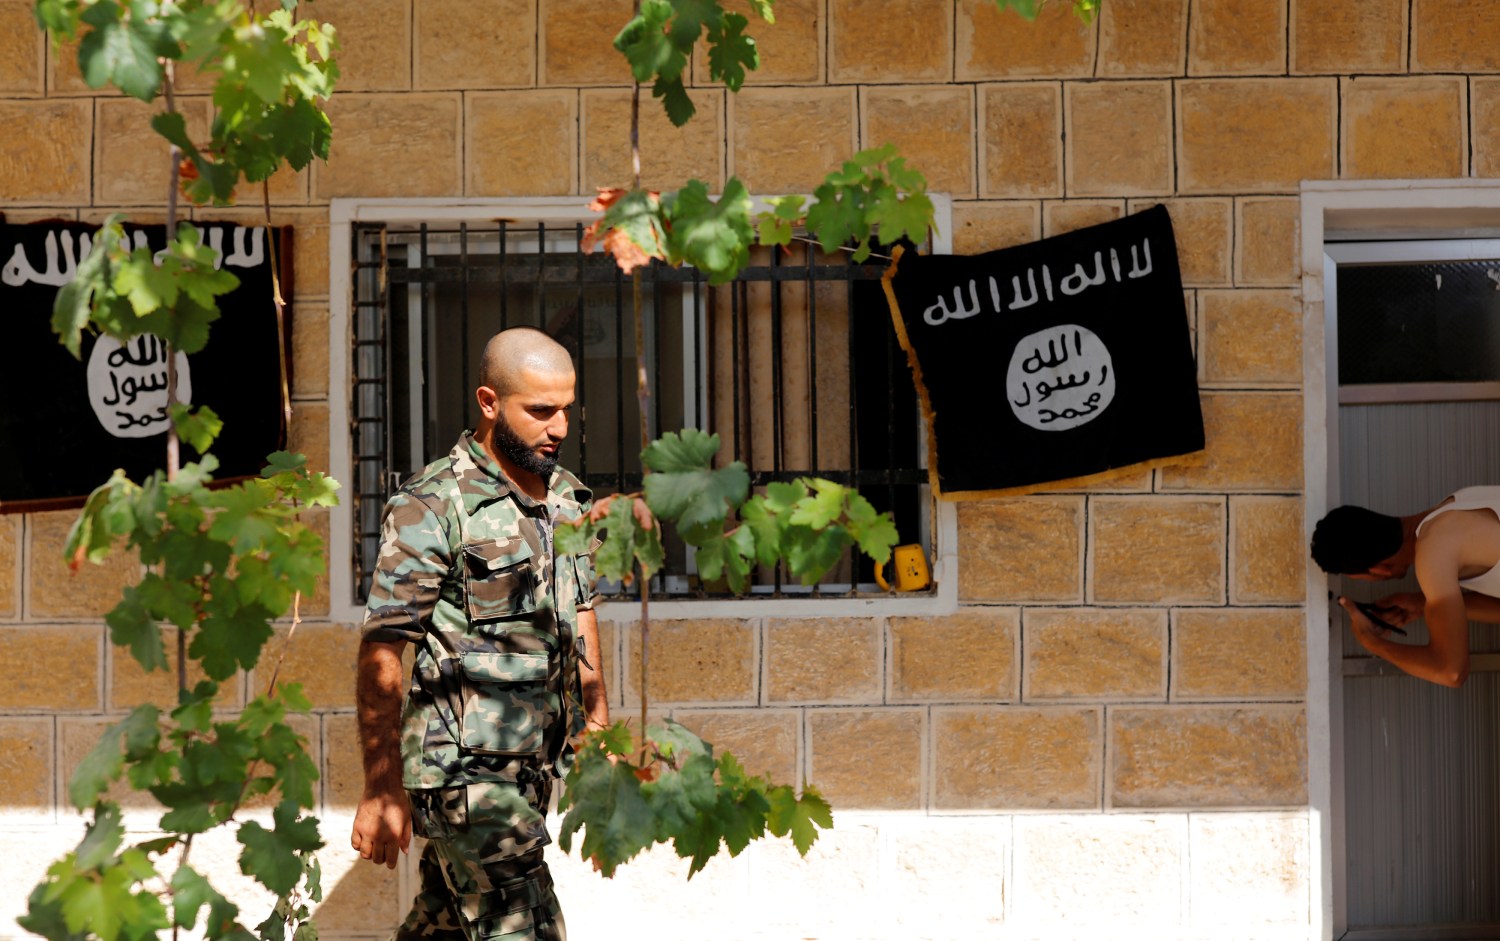 A member of Turkish-backed Free Syrian Army (FSA), seen with the Islamic State flags in the background, walks outside of a building in the border town of Jarablus, Syria, August 31, 2016. REUTERS/Umit Bektas - RTX2NQ7V